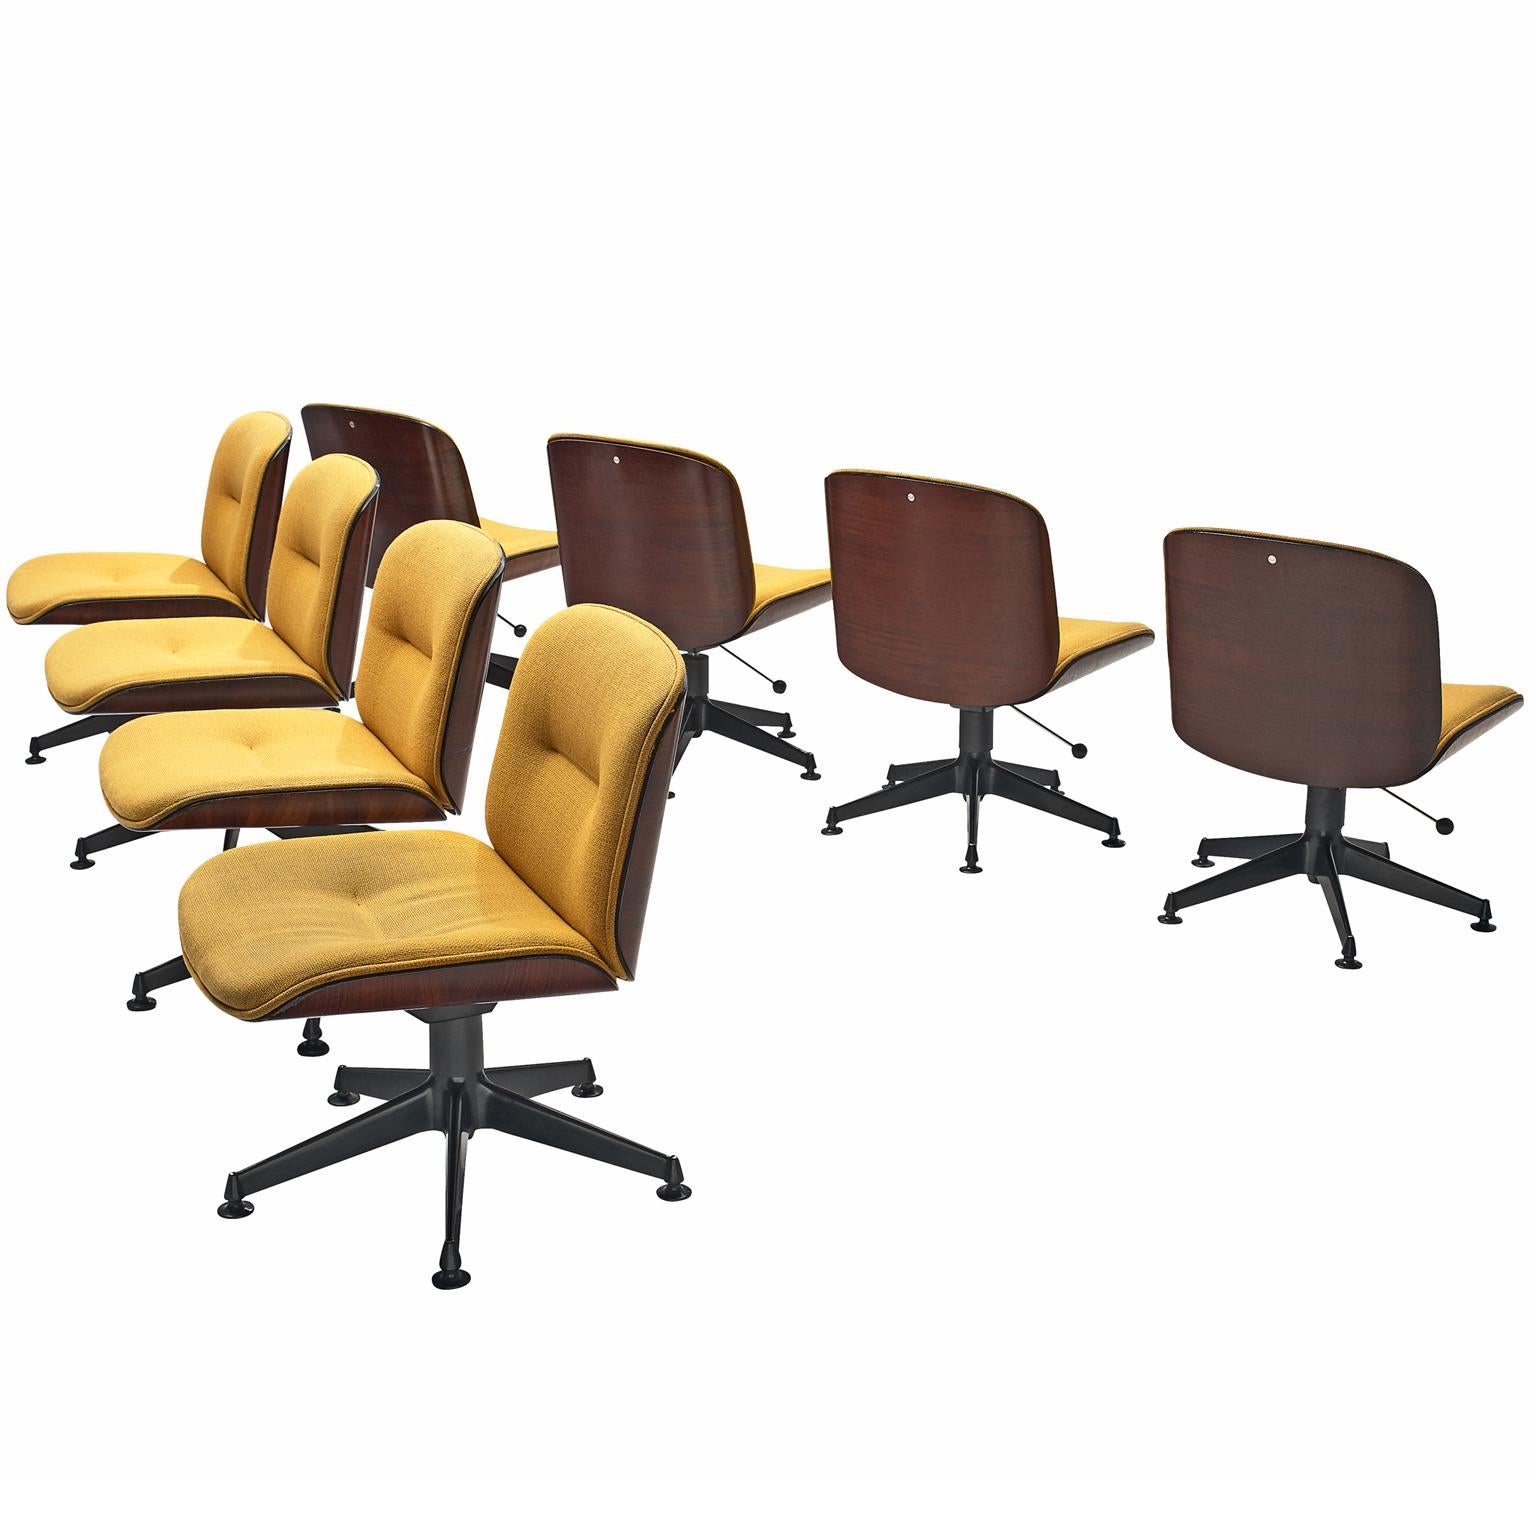 Ico Parisi for MIM Roma, set of 8 office chairs, rosewood, metal and fabric, Italy, 1950s.

Set of eight swivel office chairs from the 'Terni' series by MIM Roma. The seating and back consist of curved shells made of rosewood, which hold the